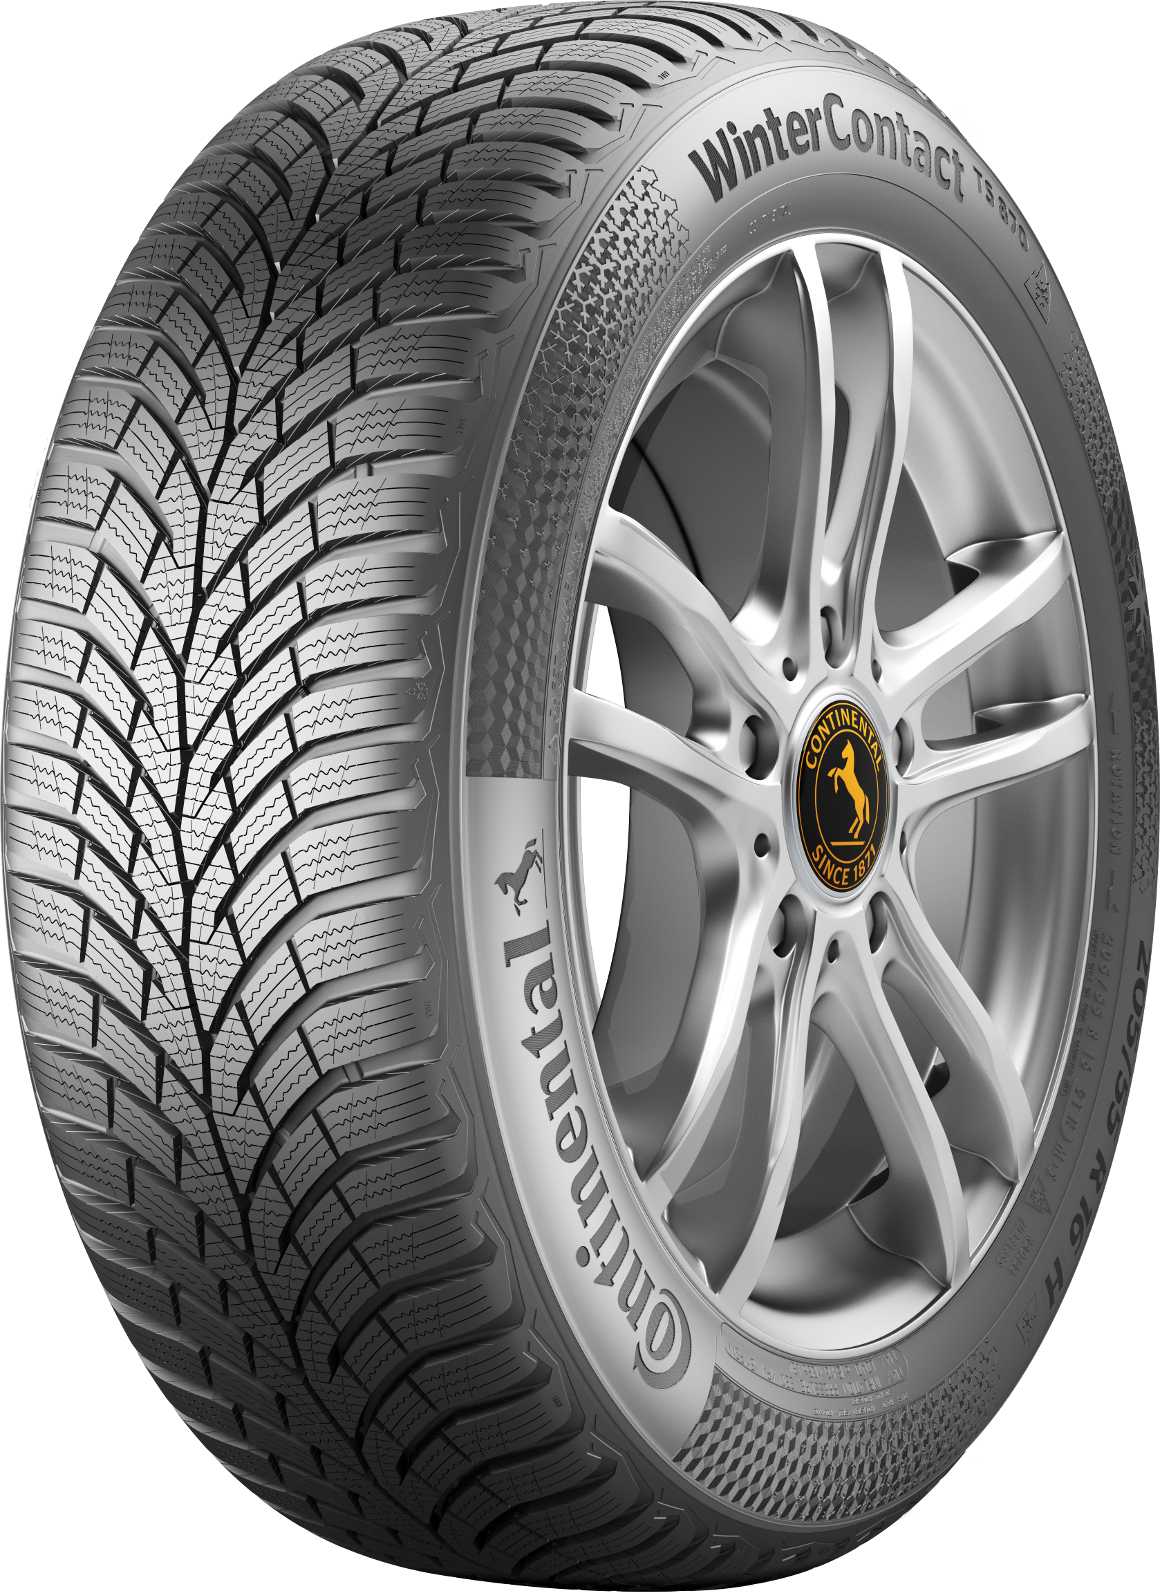    Continental Winter Contact TS870 155/70 R19 